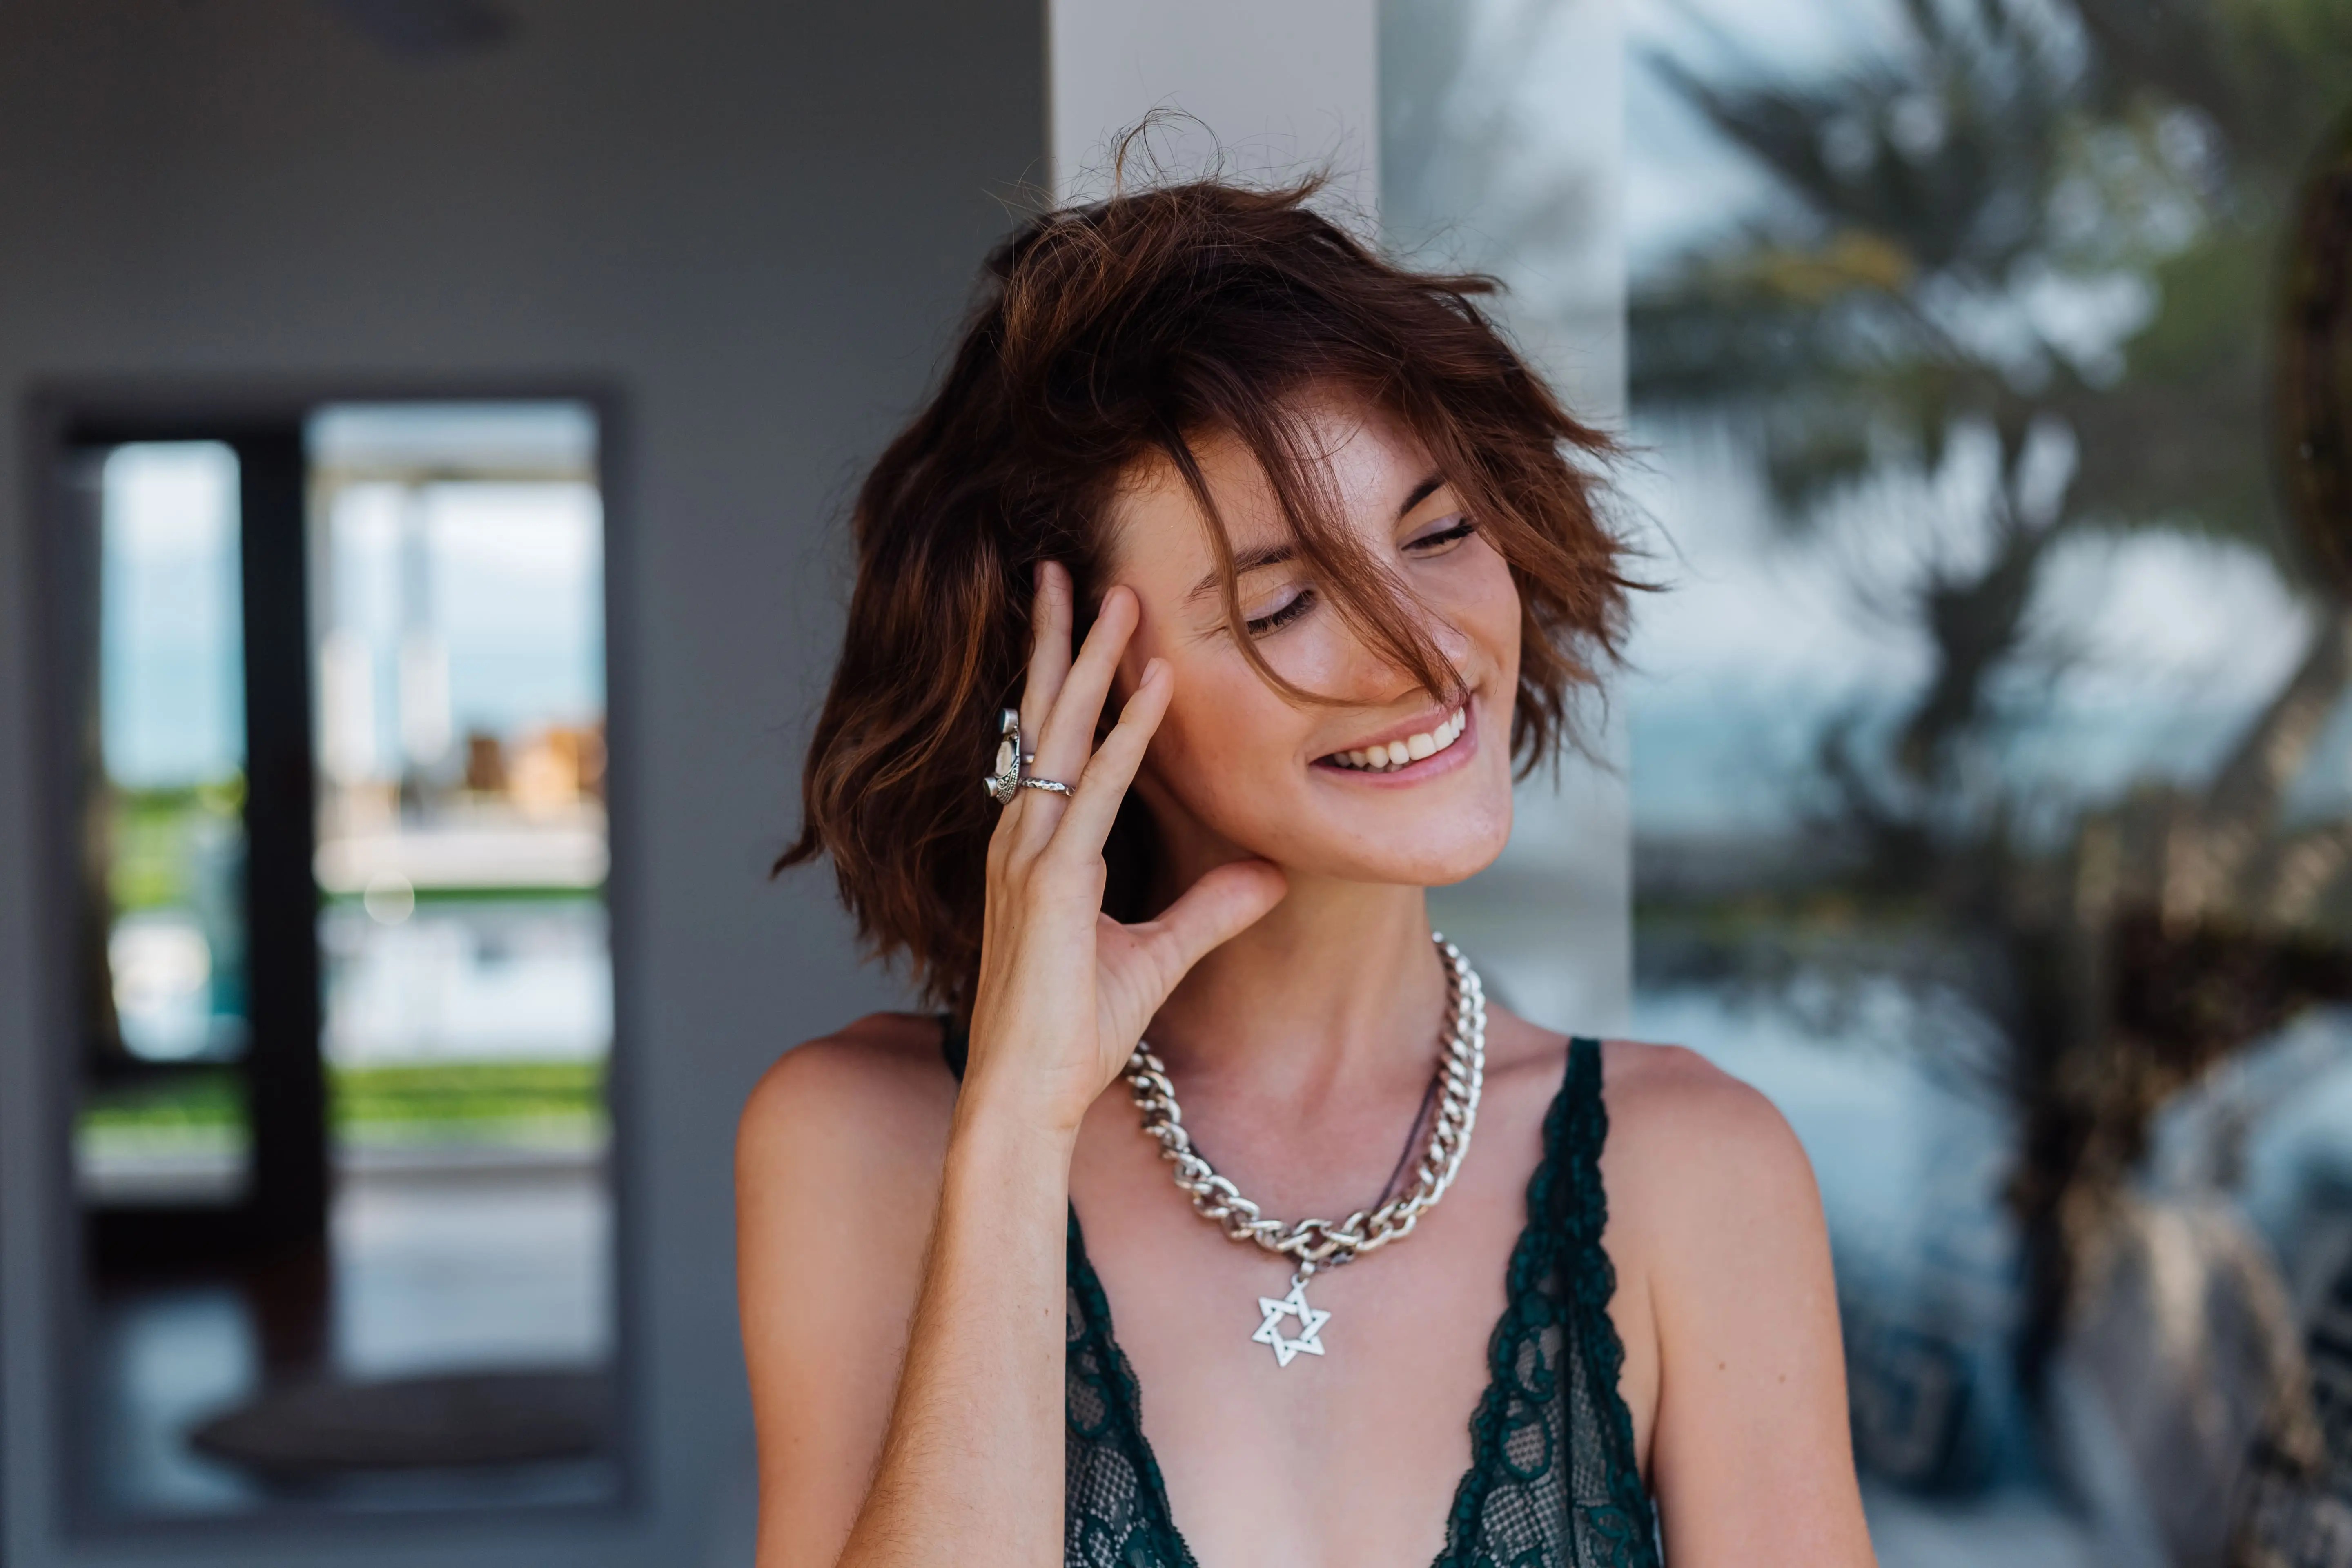 How jewellery can affect your mood and psyche